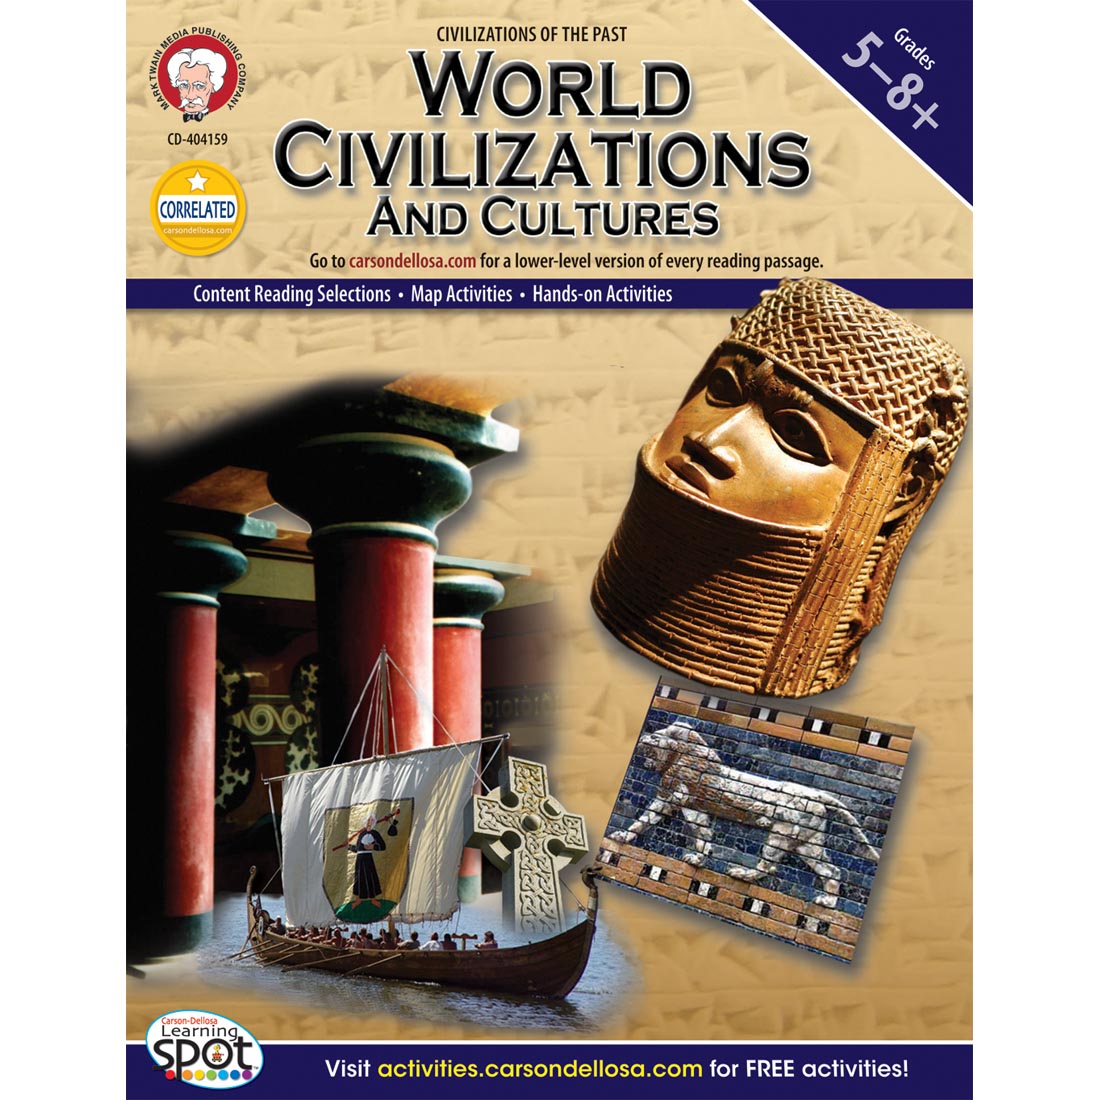 World Civilizations and Cultures Book by Mark Twain Media